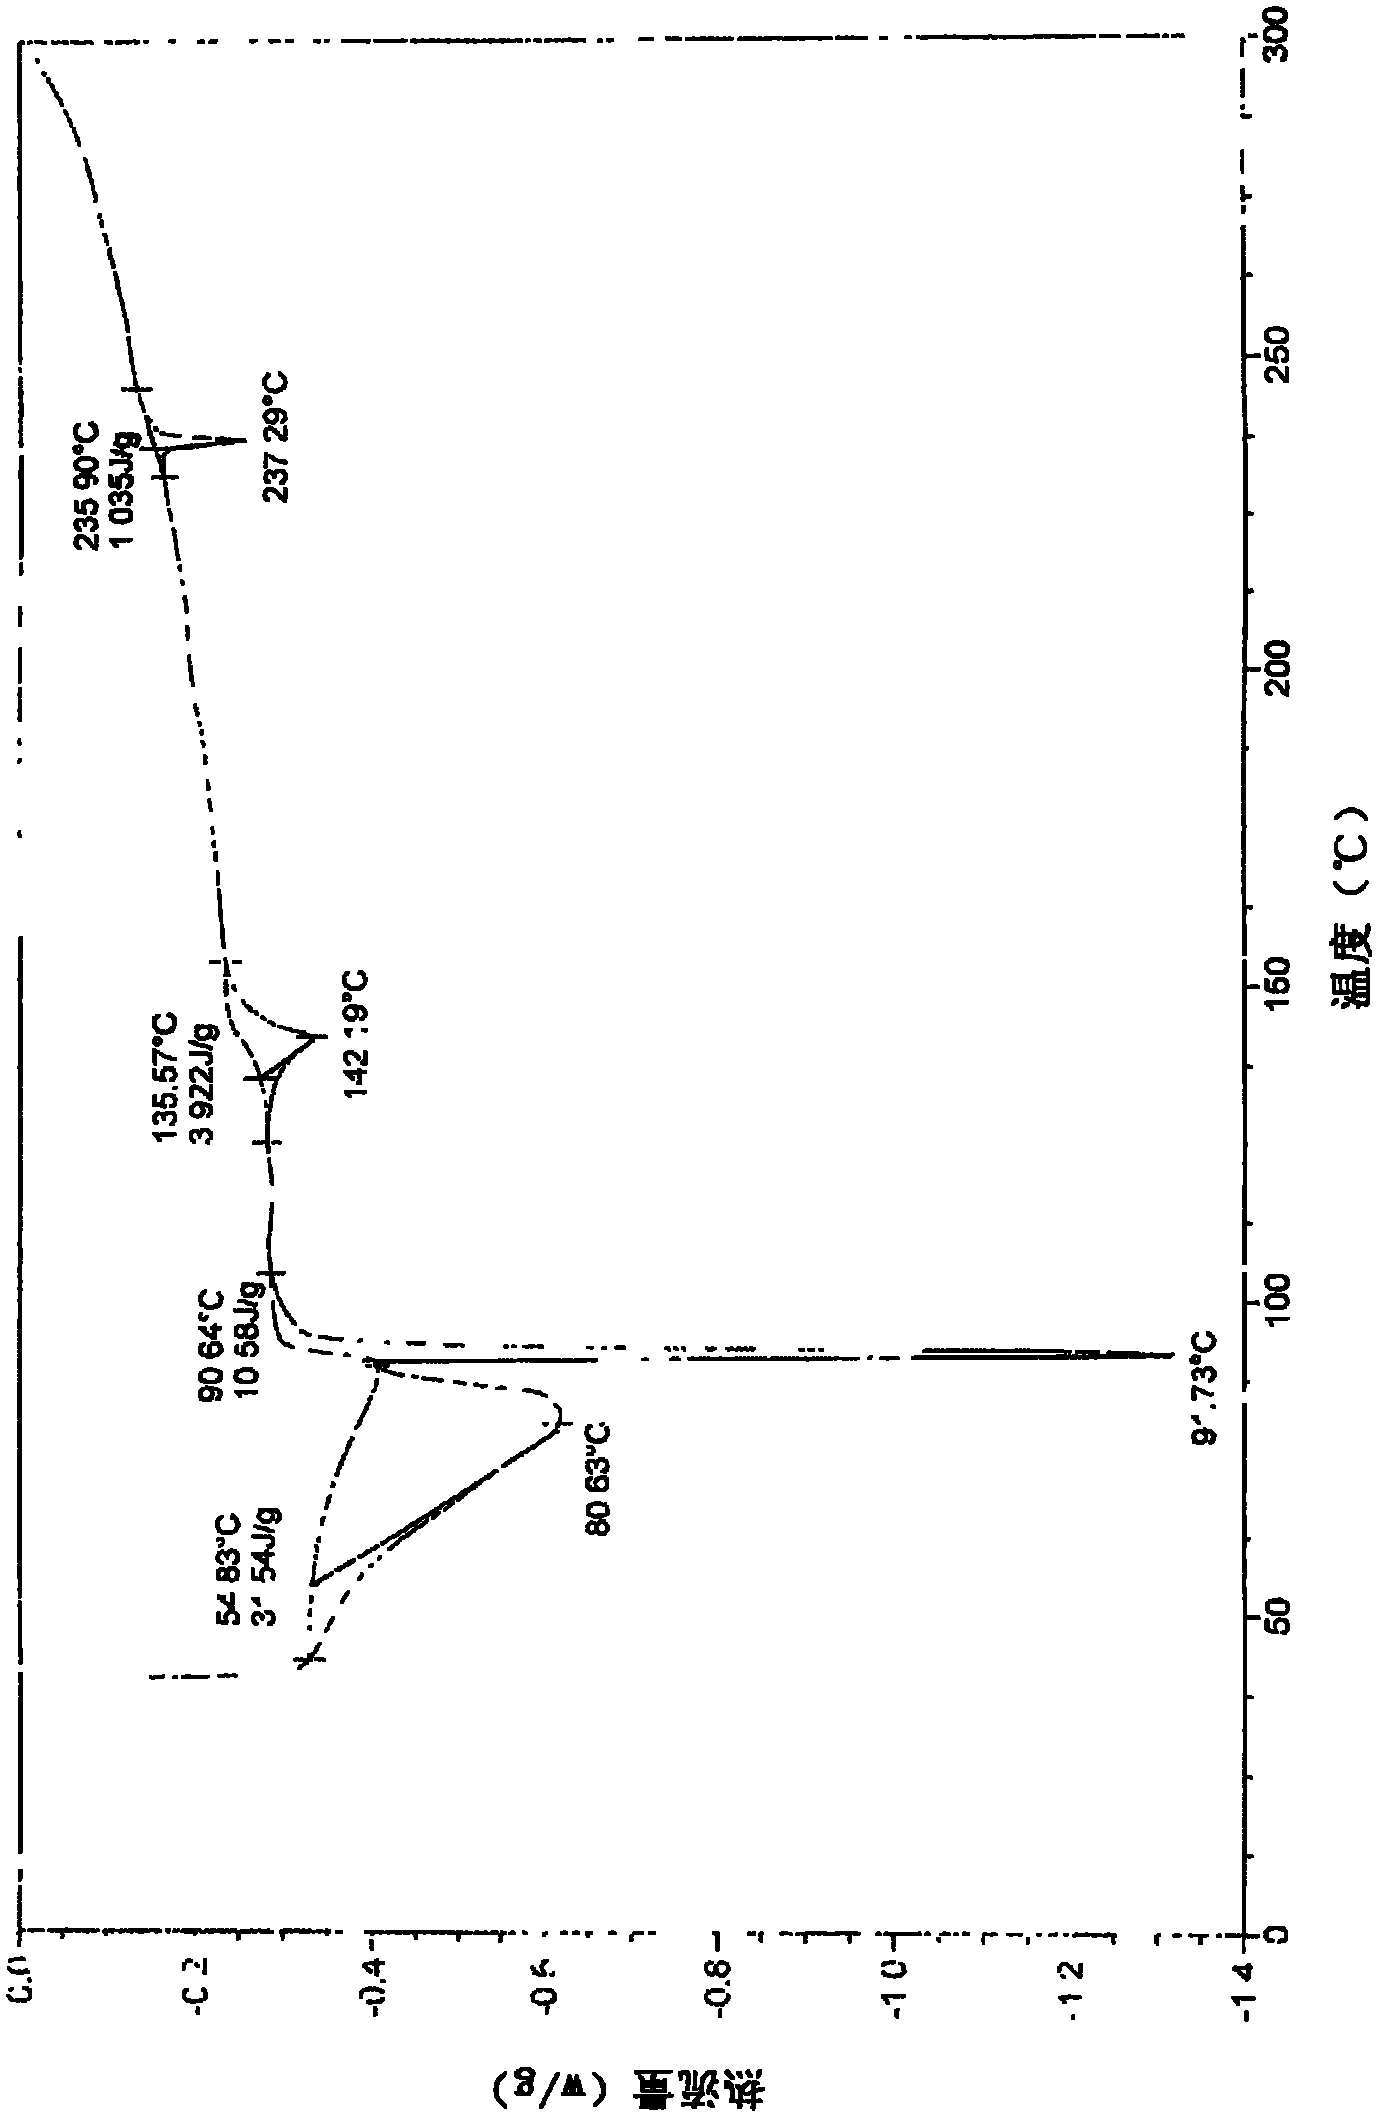 New crystal form for sodium valproate and preparation method and usage thereof